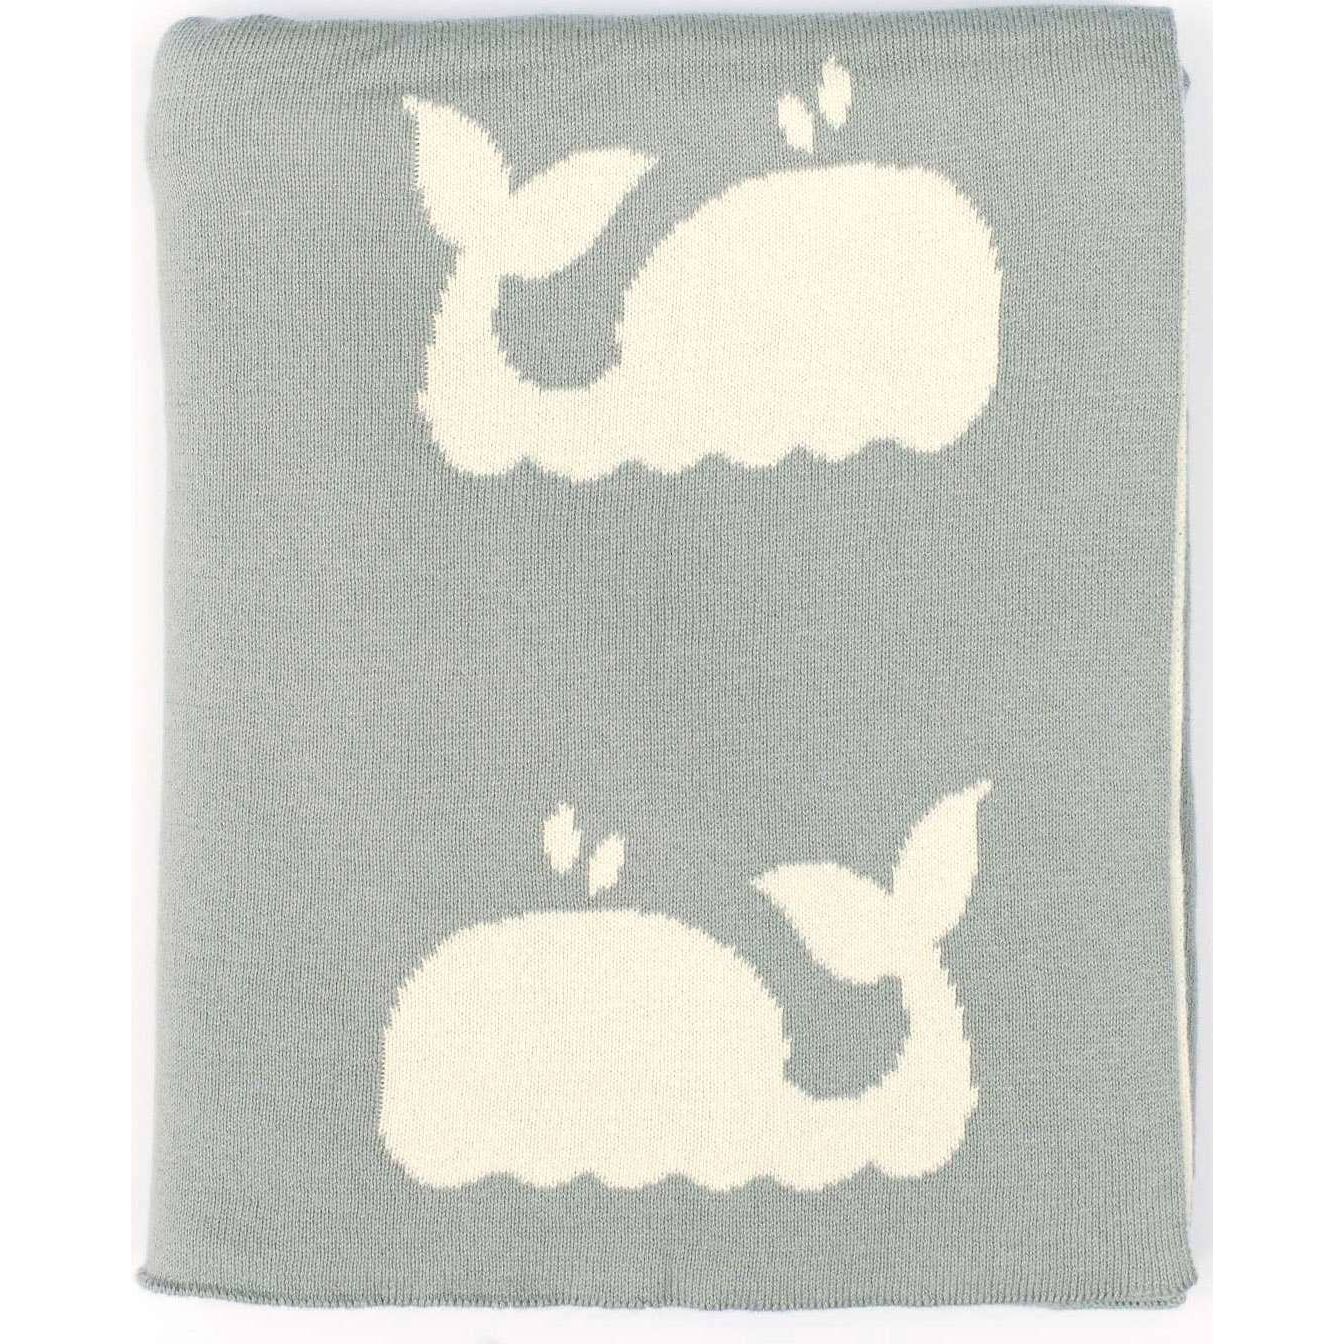 Whale Design Knit Cotton Baby Blanket